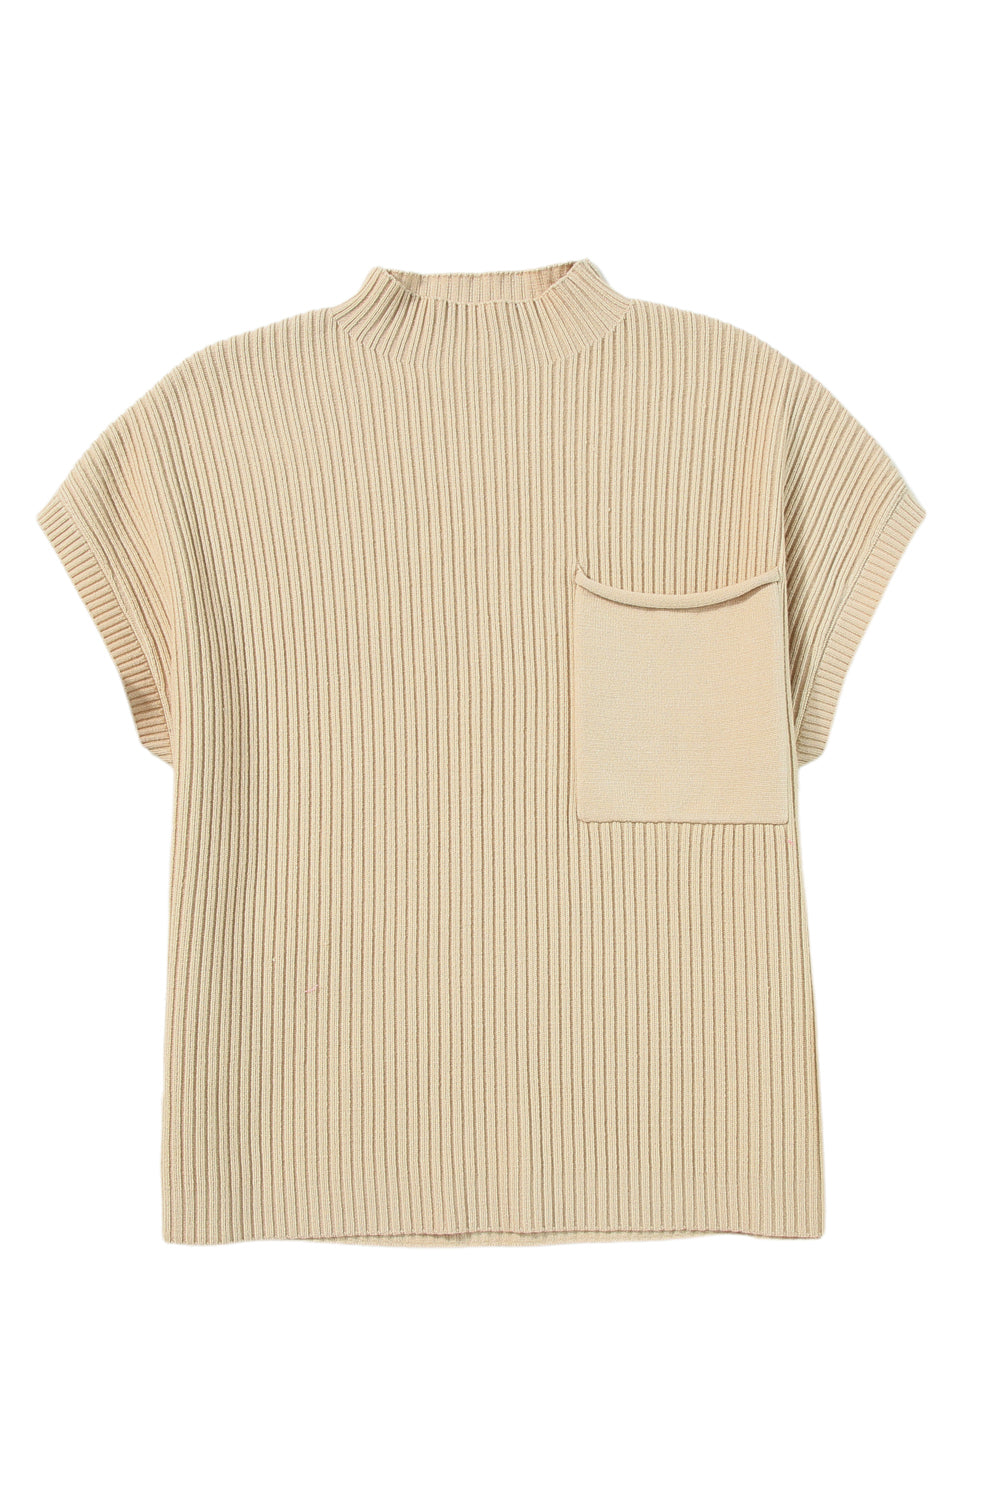 Oatmeal Patch Pocket Ribbed Knit Short Sleeve Sweater - Dixie Hike & Style